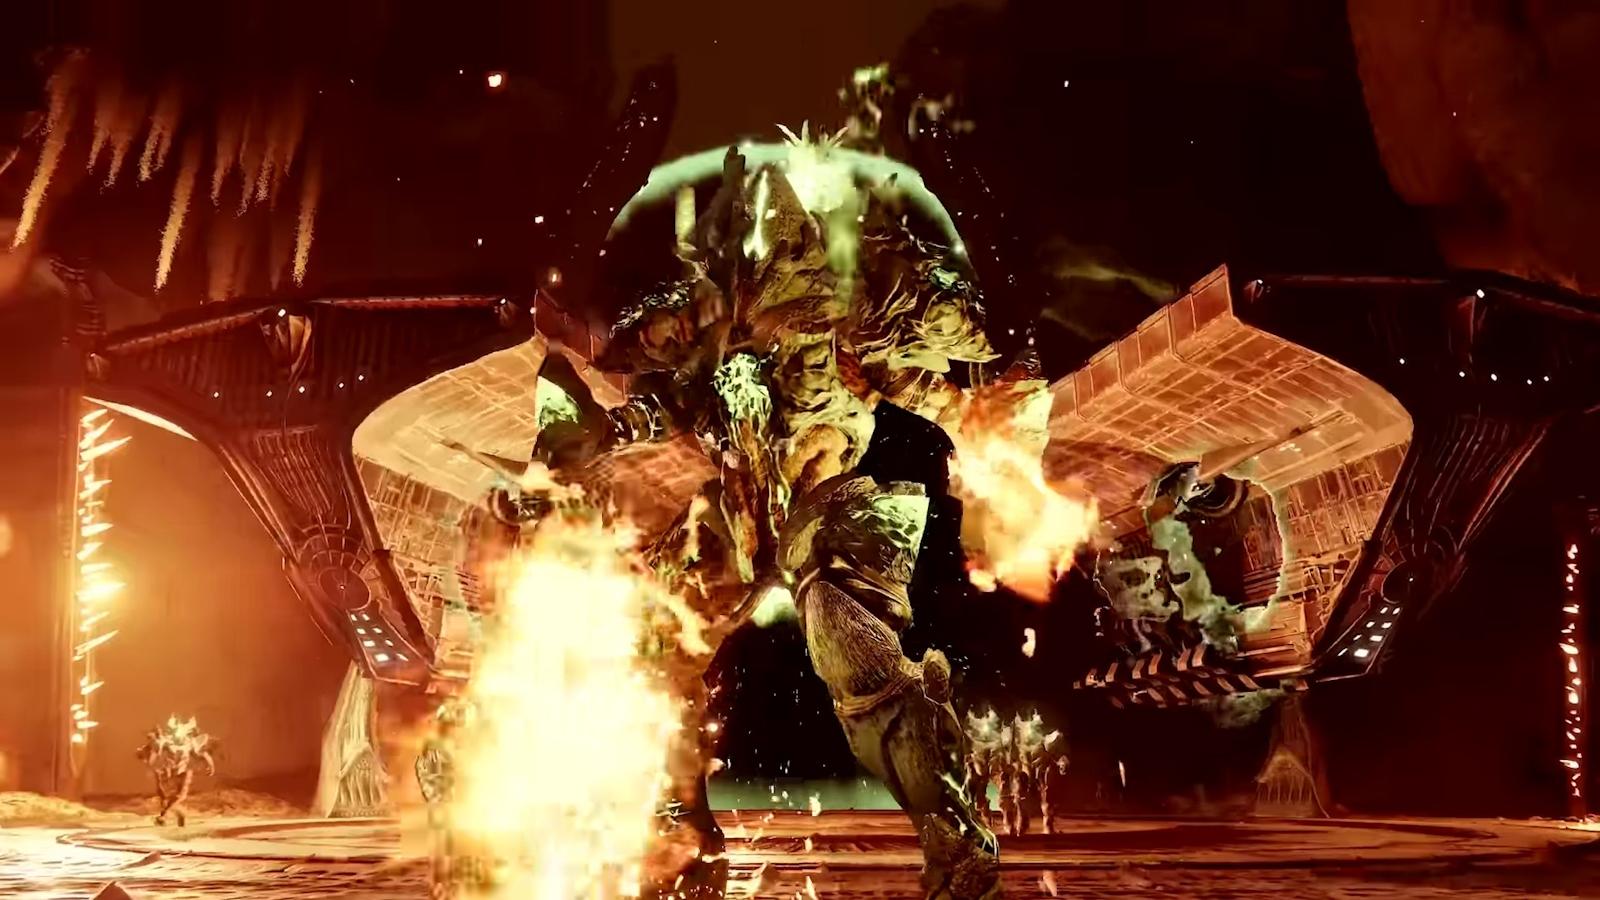 The Hive boss from Season of the Witch trailer in Destiny 2.